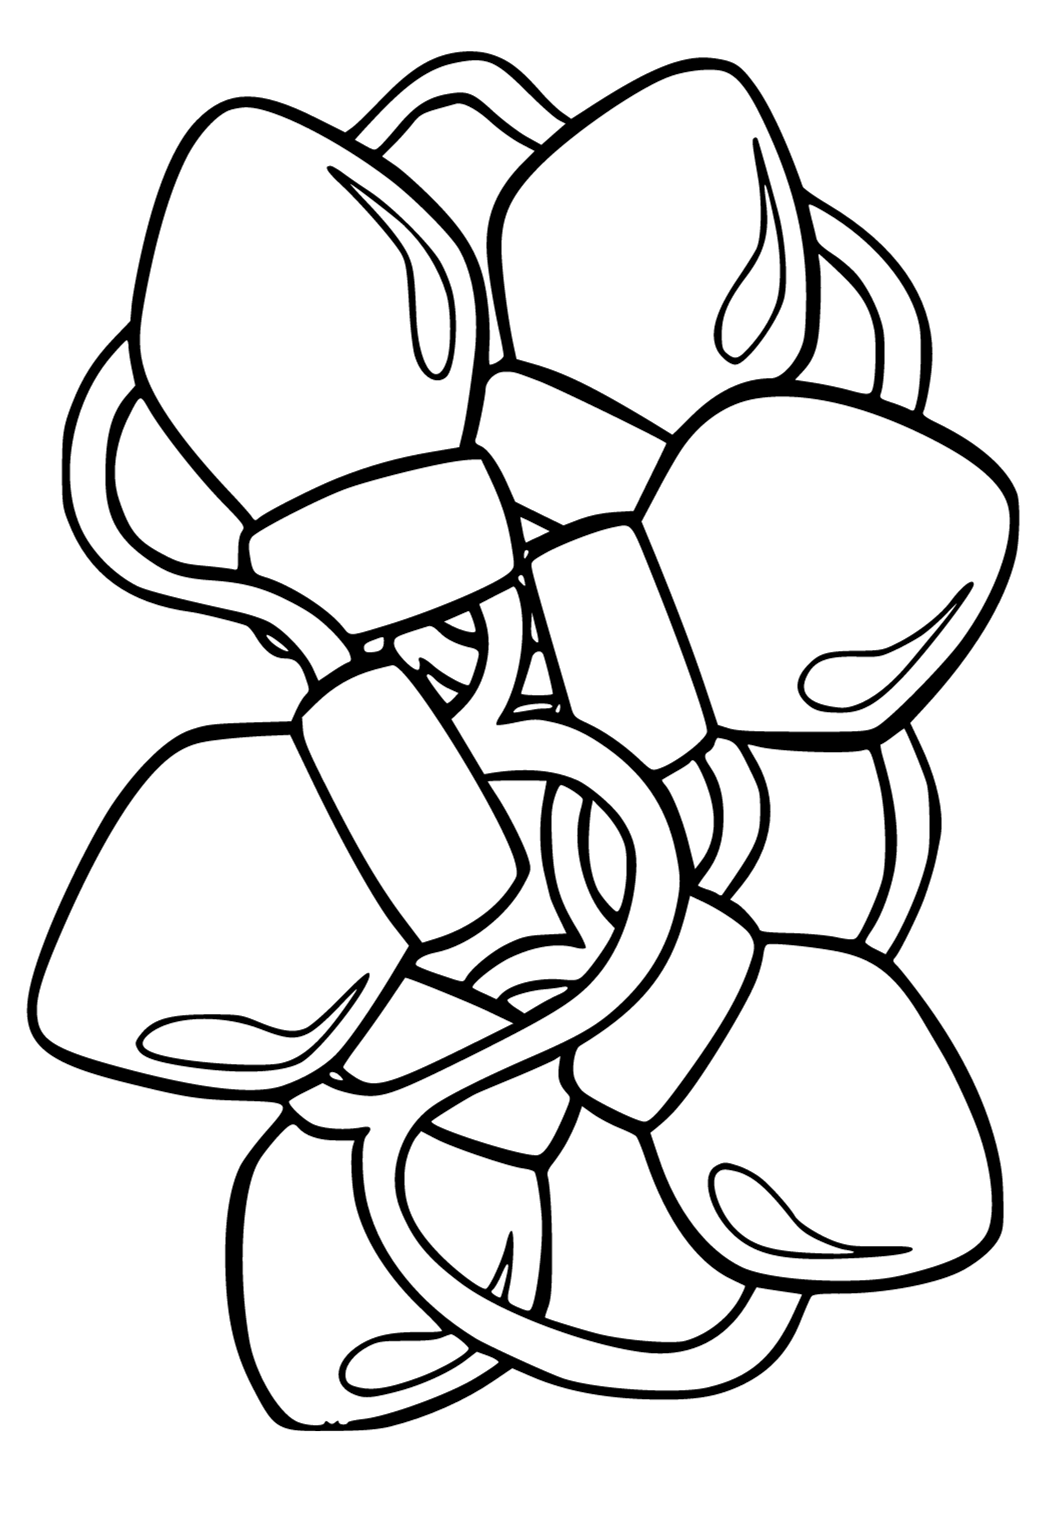 Free printable christmas lights clew coloring page for adults and kids